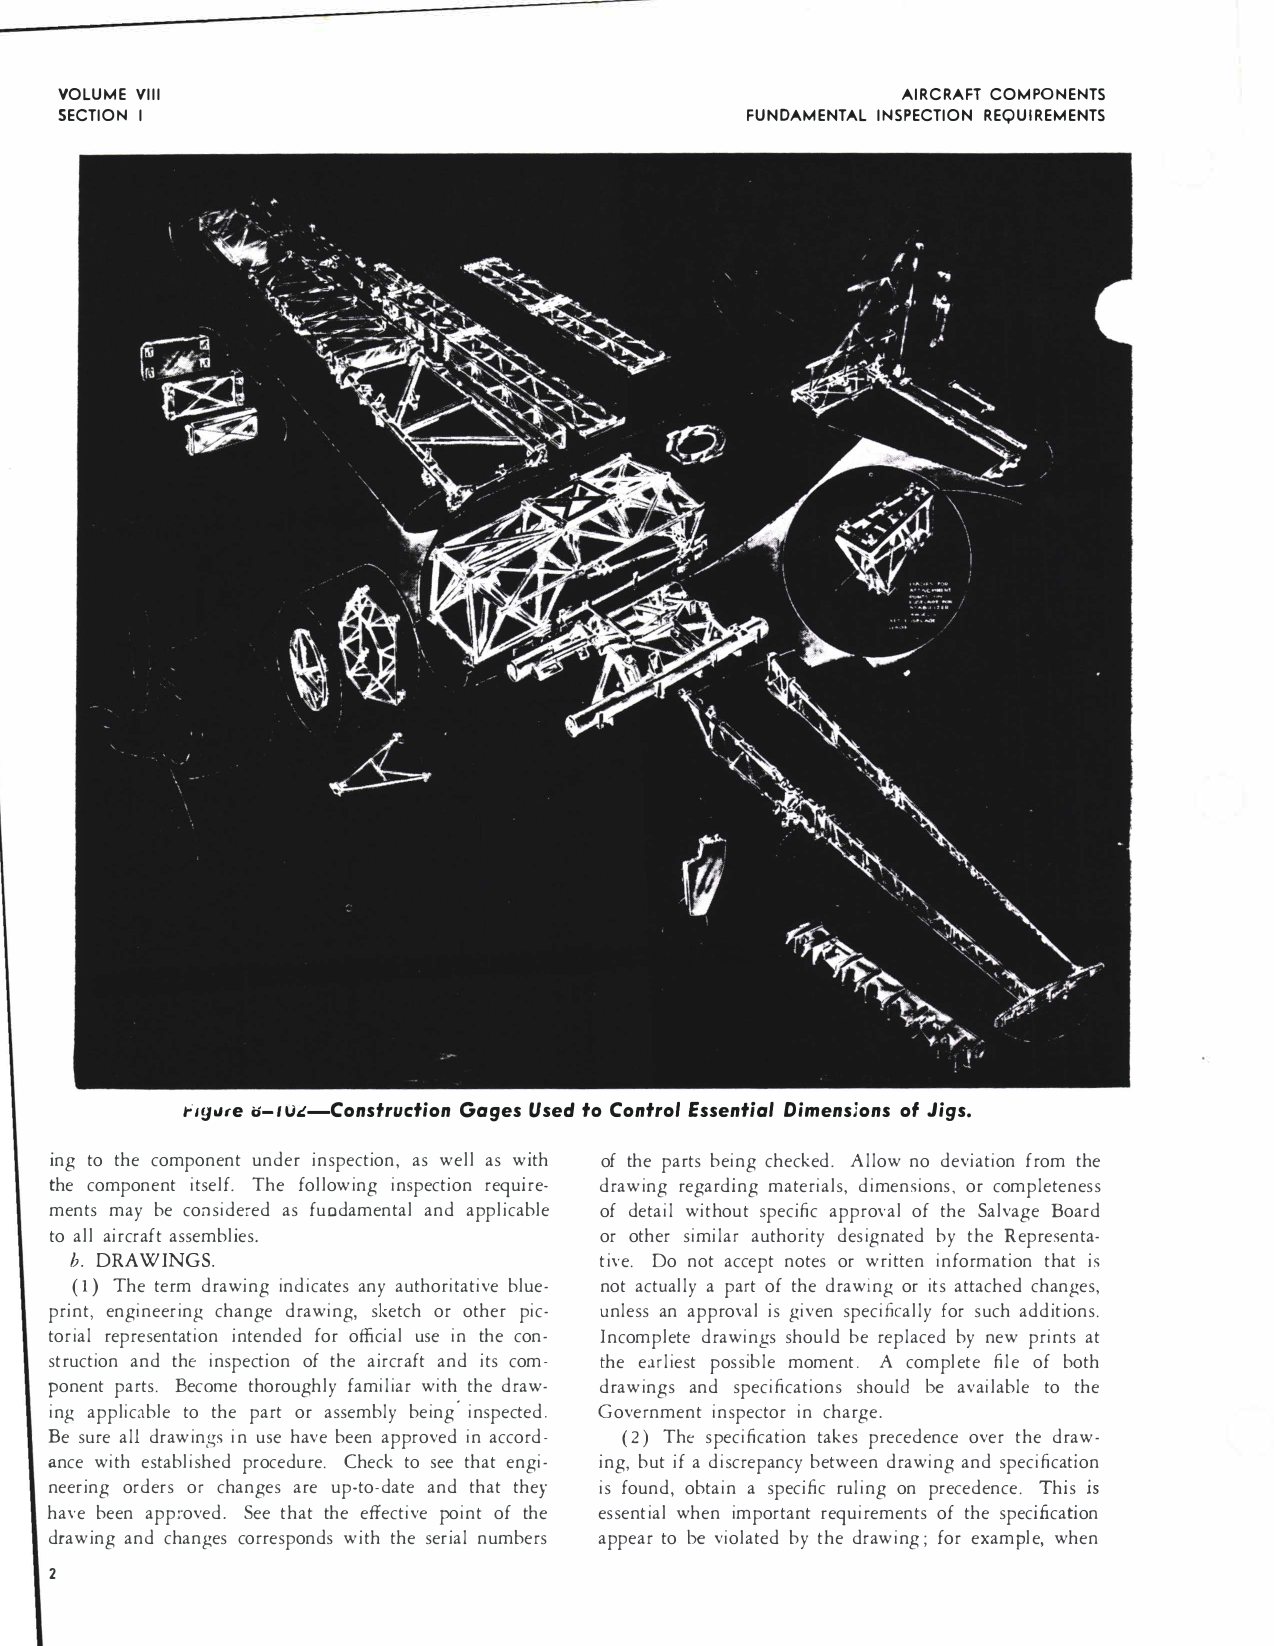 Sample page 8 from AirCorps Library document: Aeronautical Technical Inspection Manual - Aircraft Components